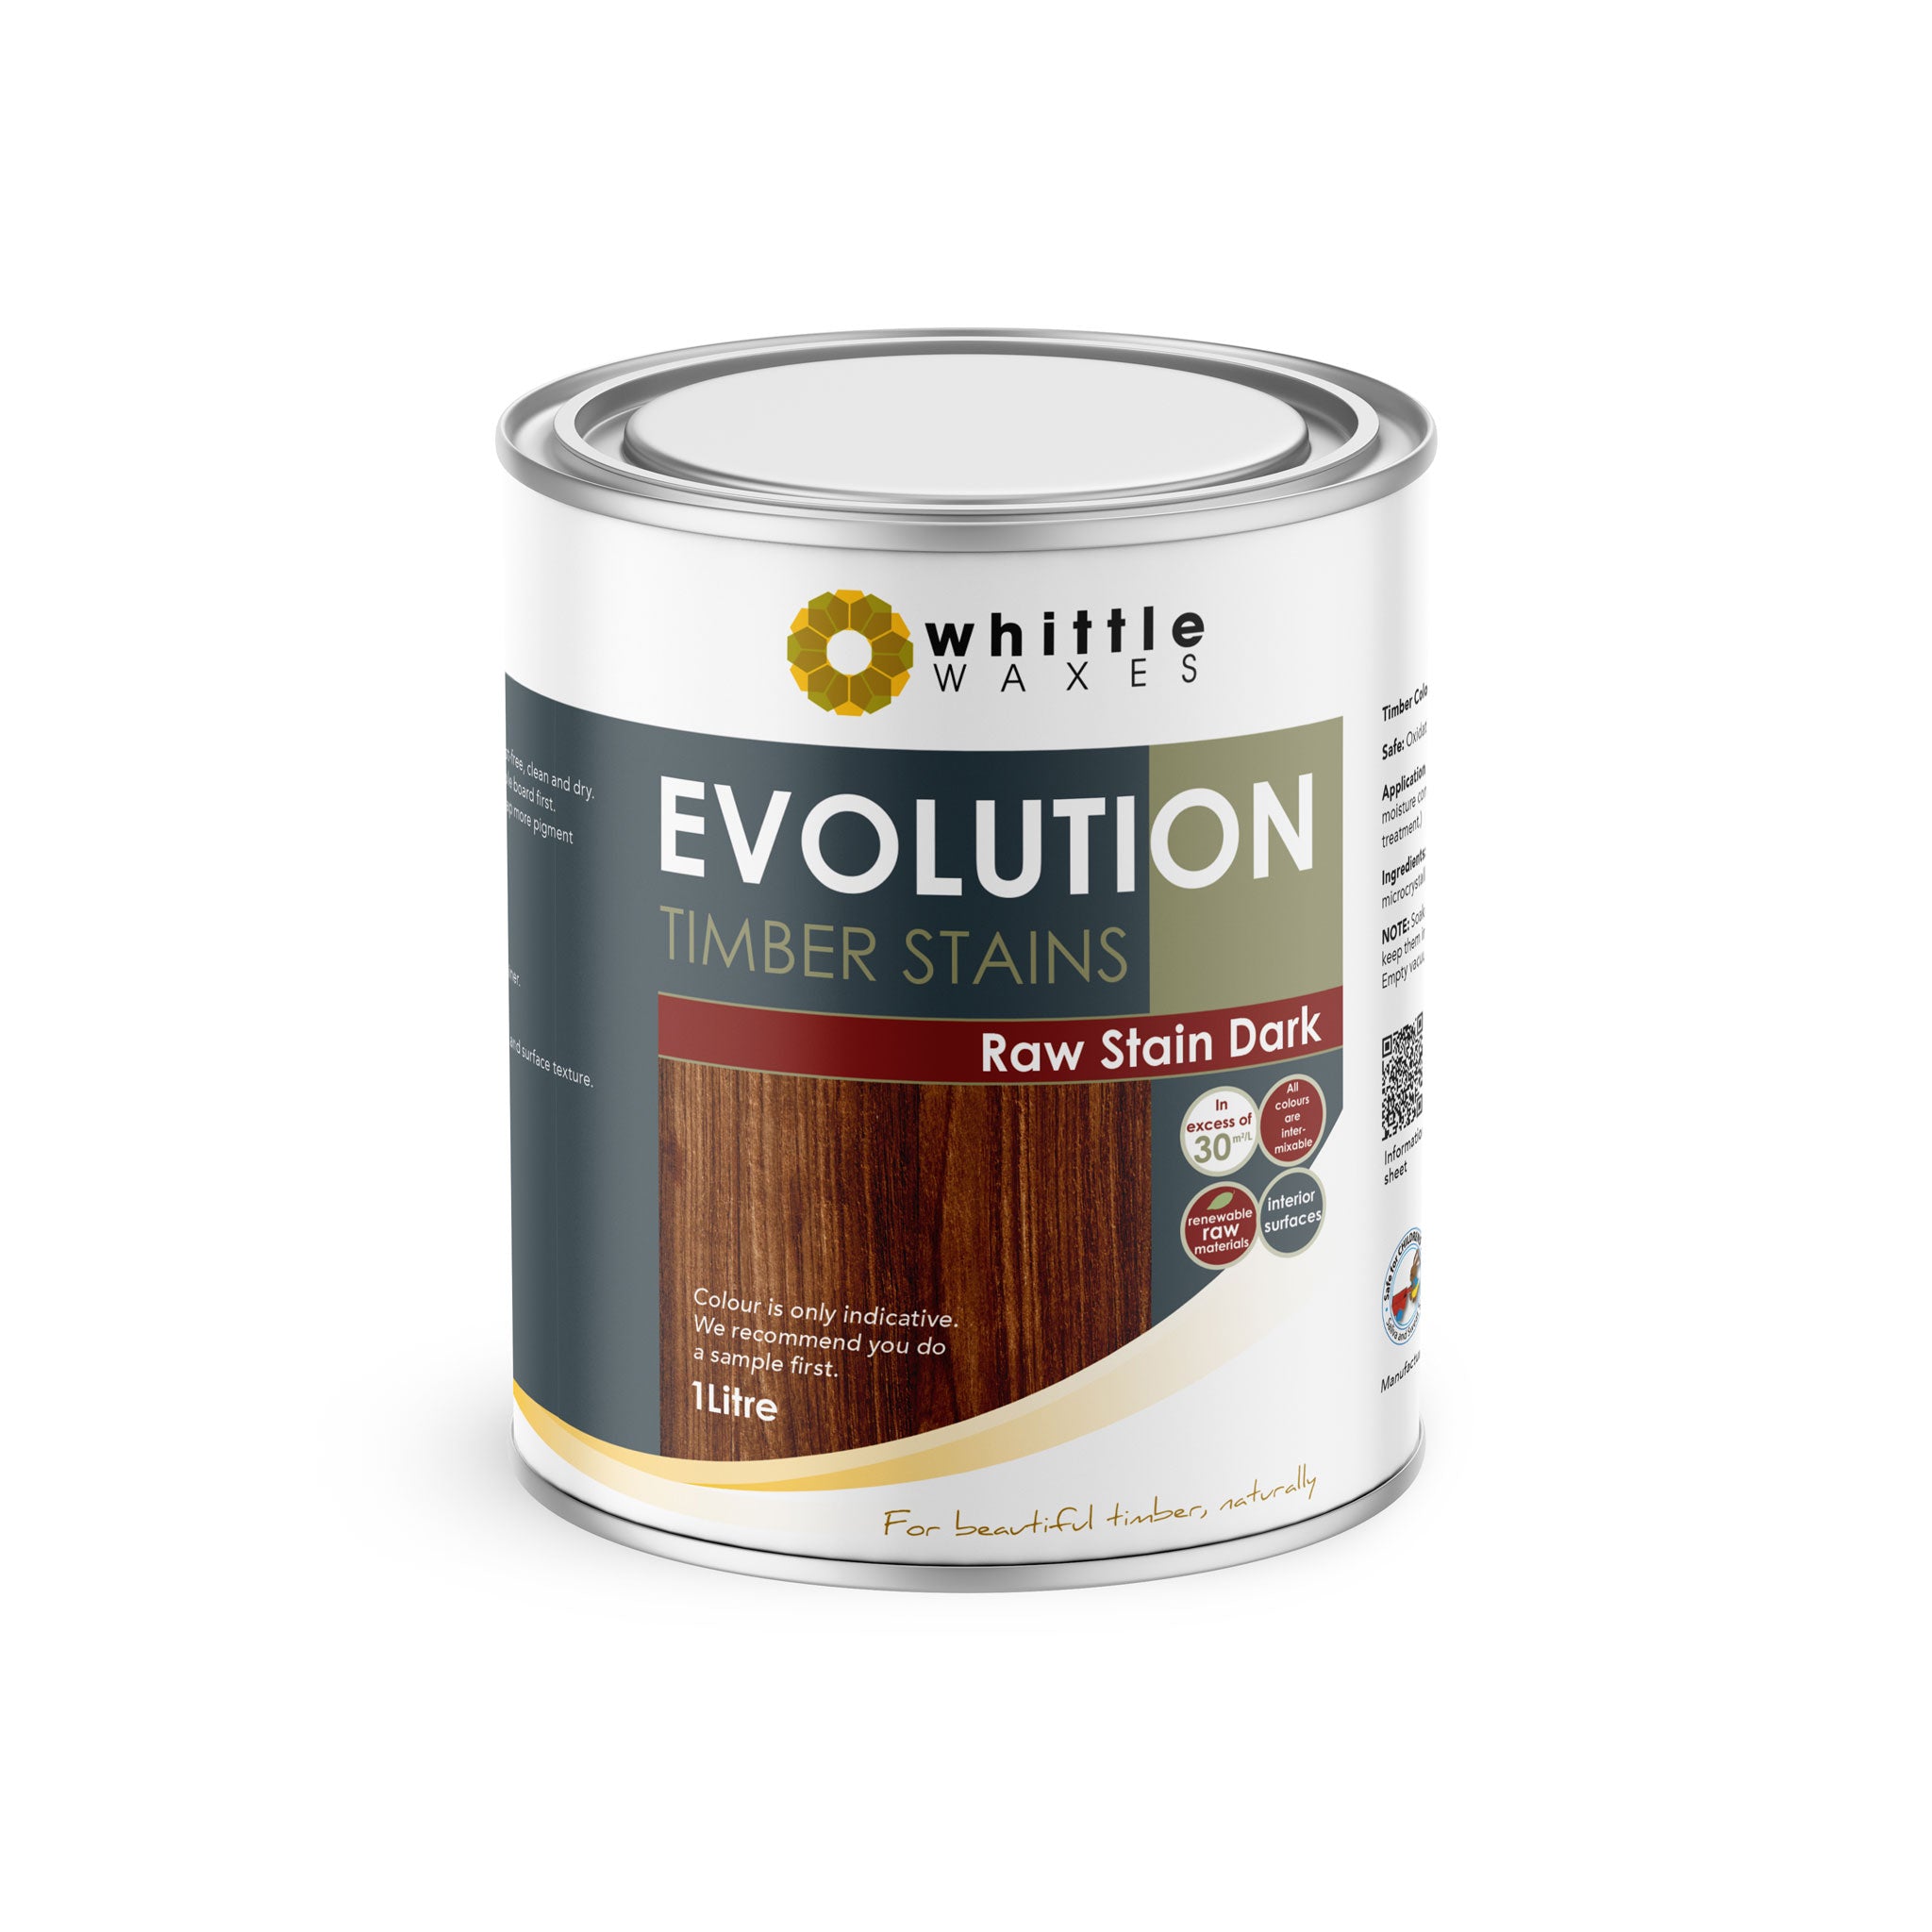 Whittle Waxes Evolution Raw Stain Dark - quality timber stain - 1 Litre